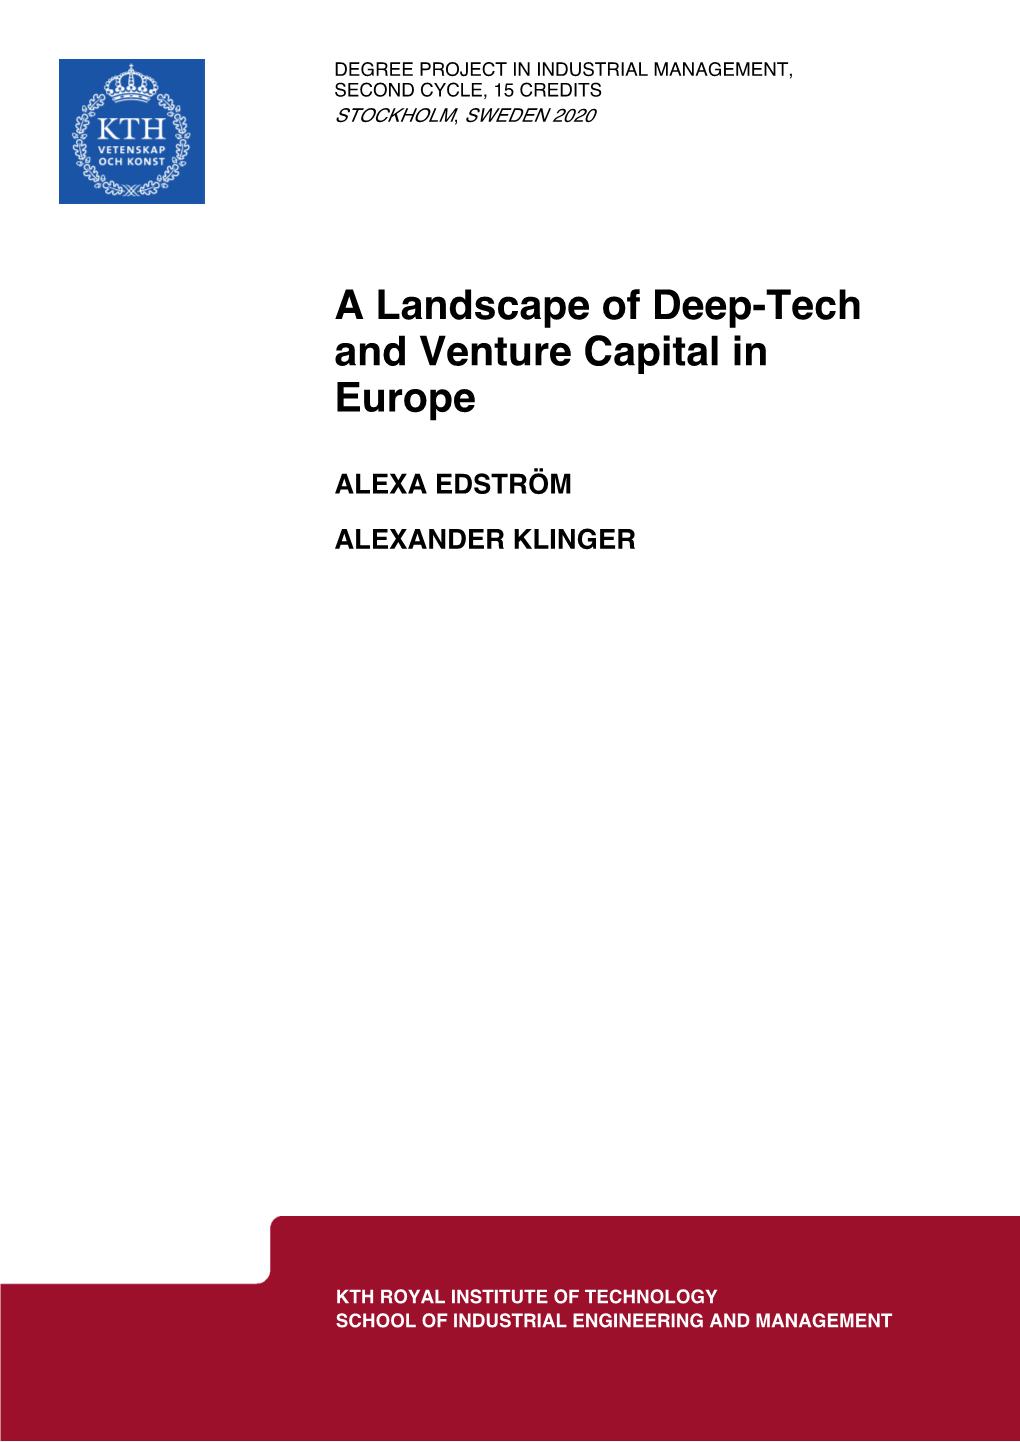 A Landscape of Deep-Tech and Venture Capital in Europe